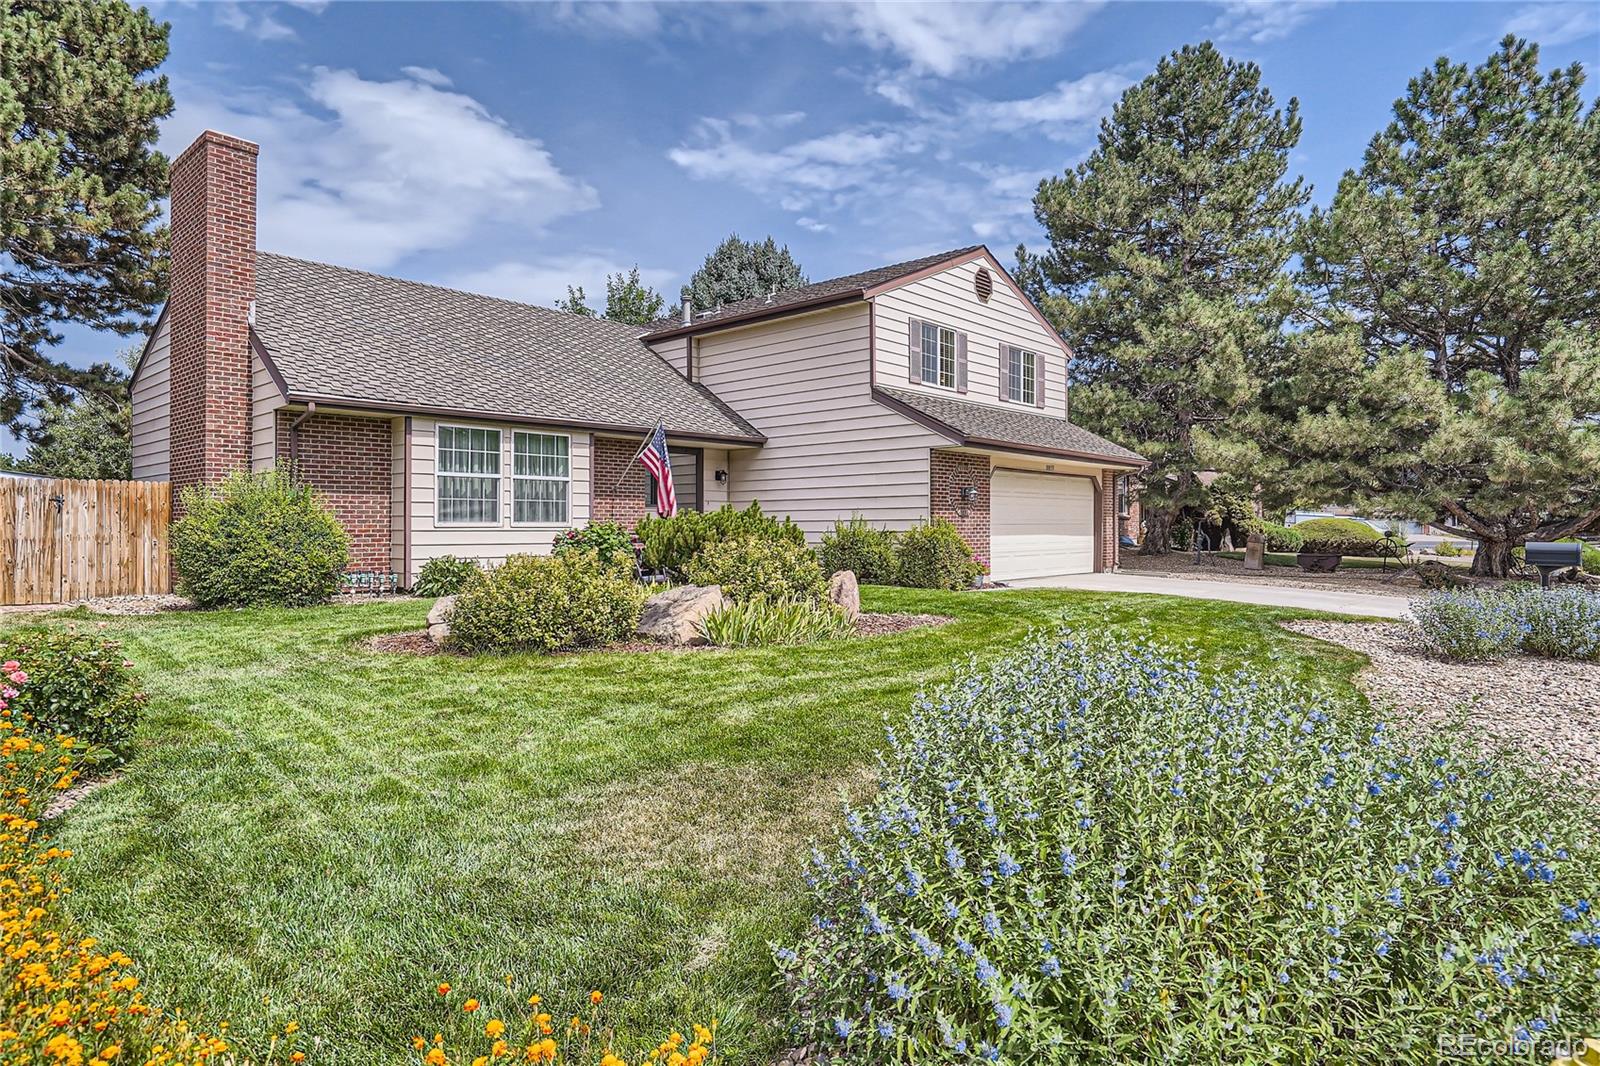 10855 w 77th avenue, arvada sold home. Closed on 2023-12-13 for $665,000.